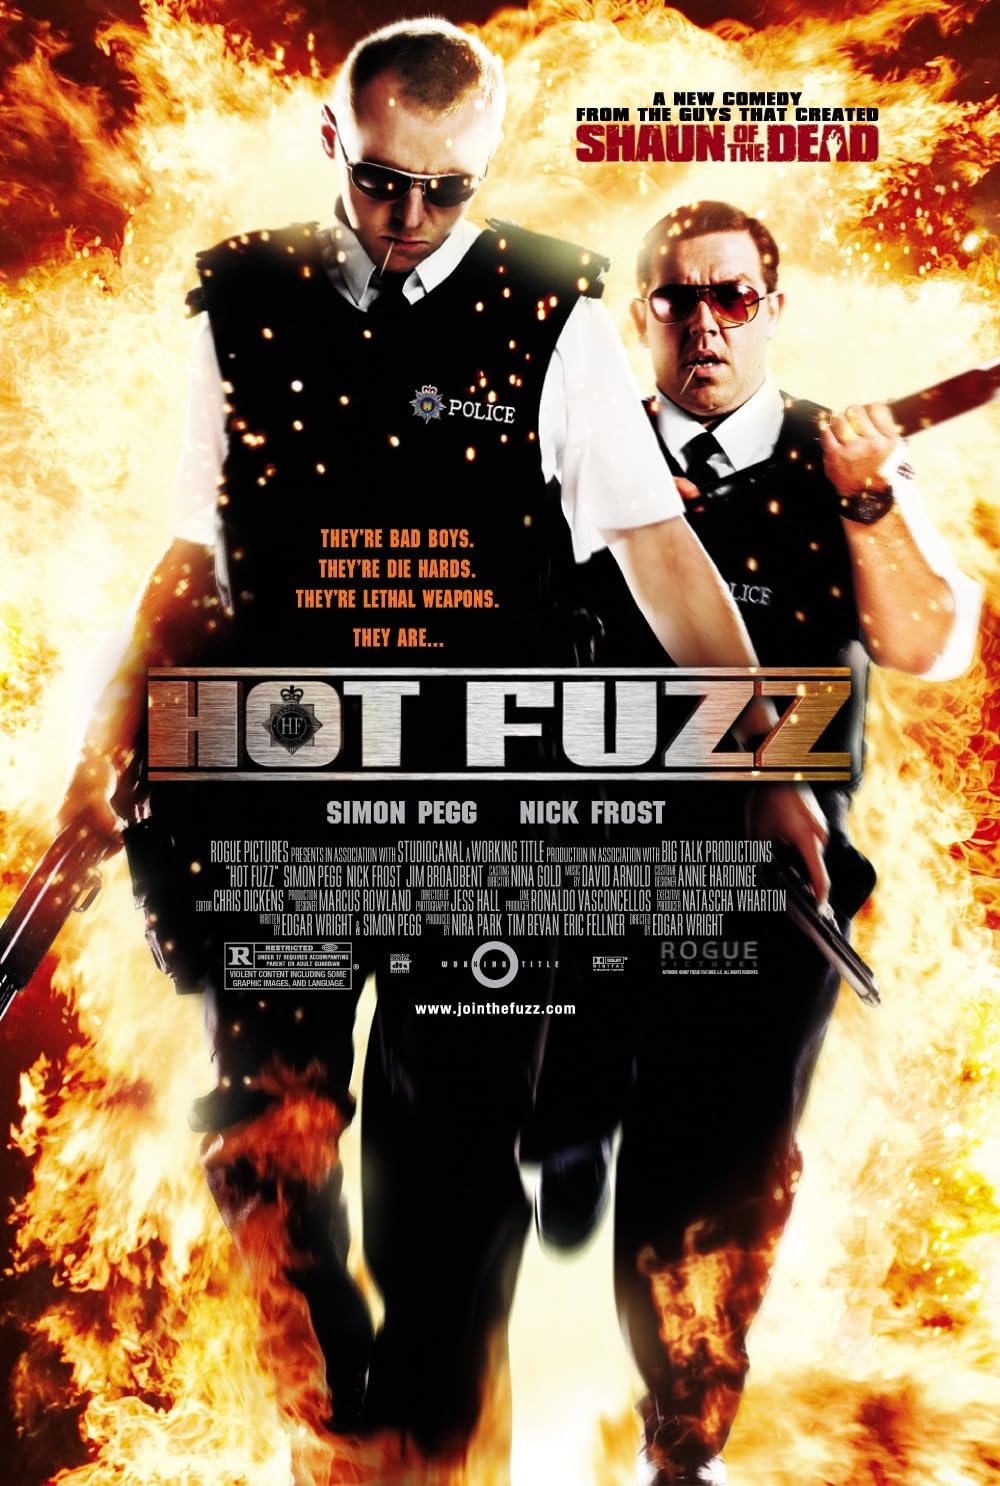 Poster for the film Hot Fuzz